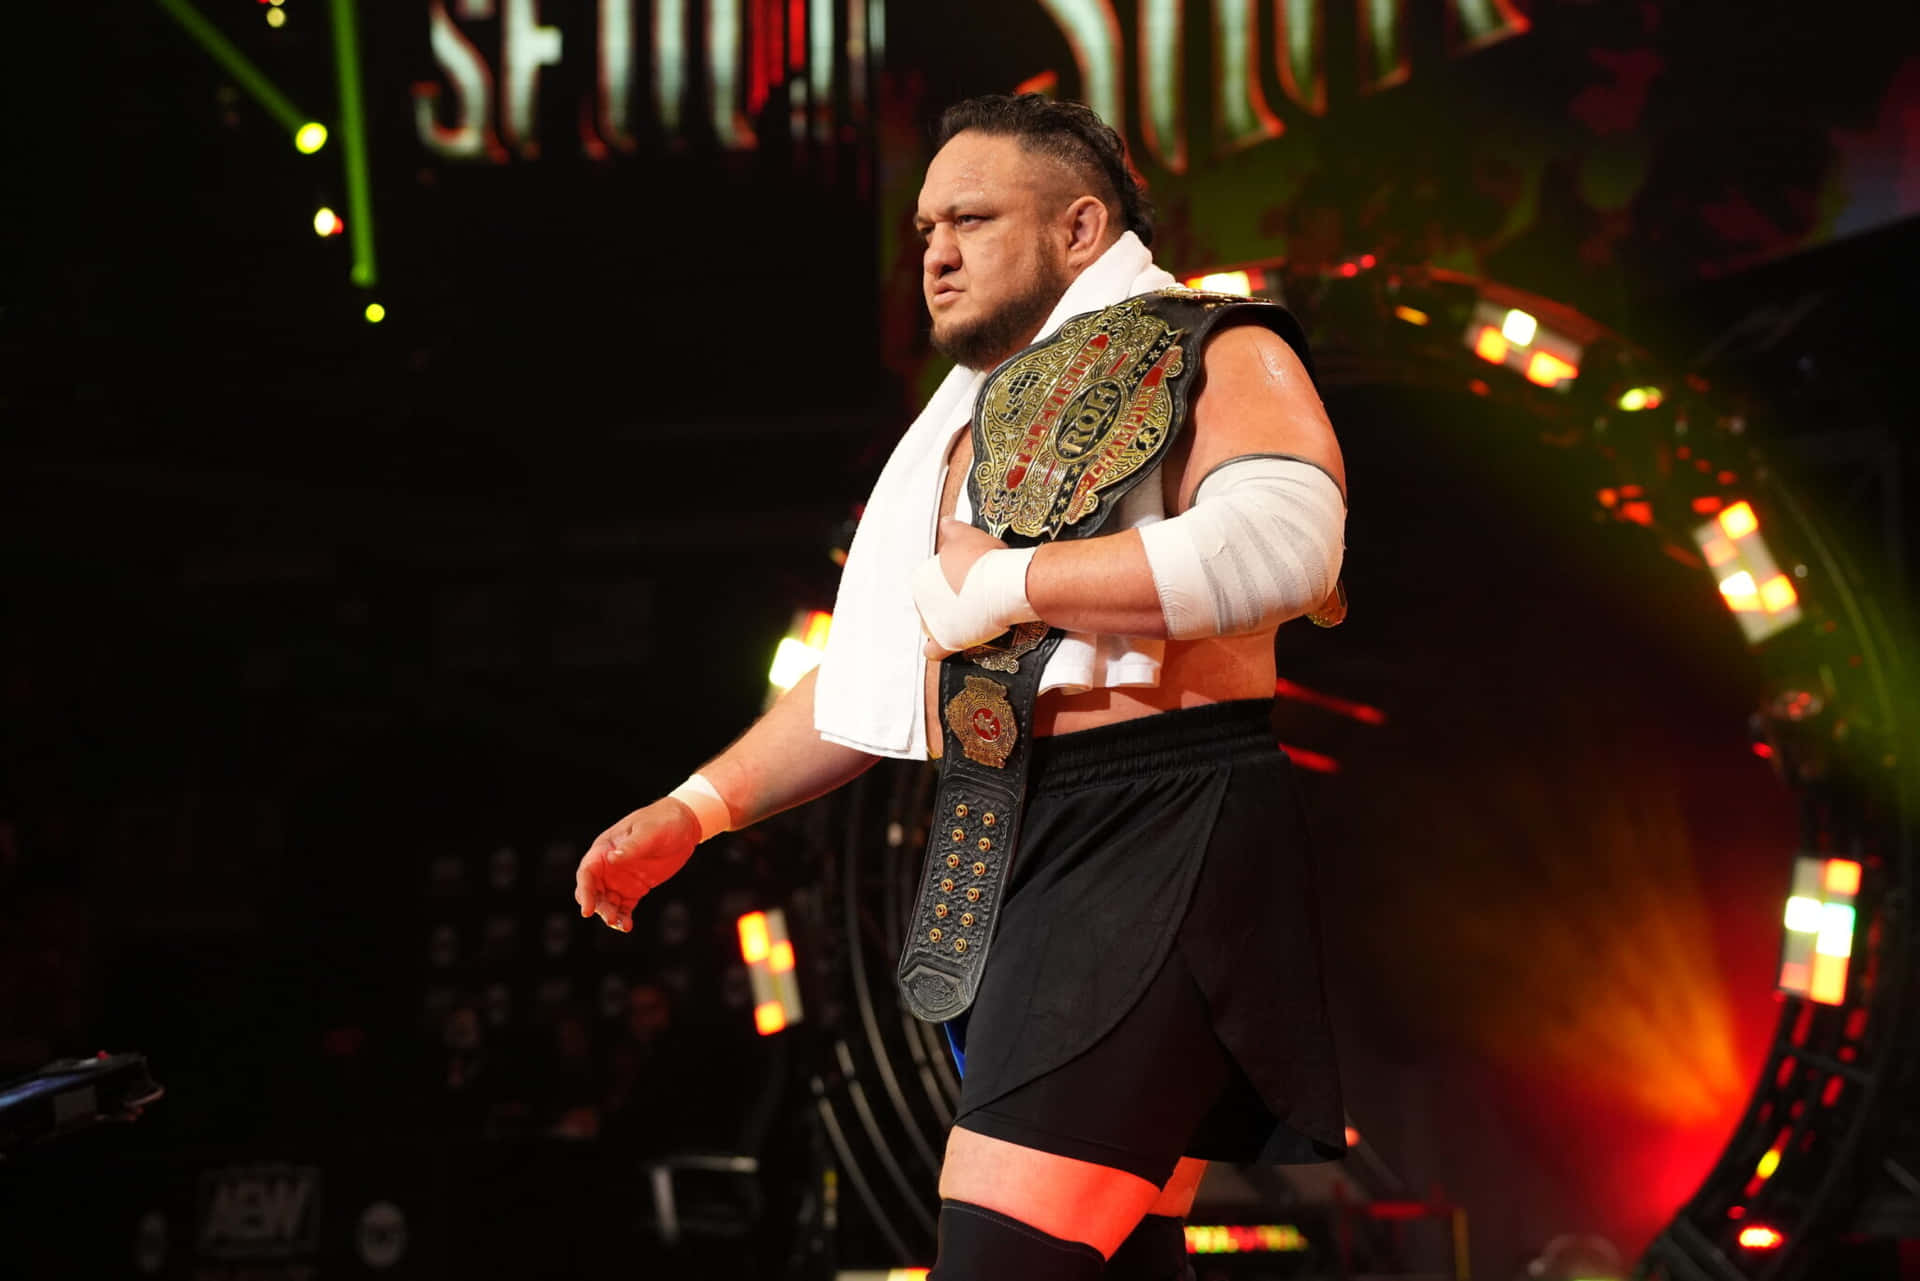 Samoa Joe In Action During The United States Championship Match